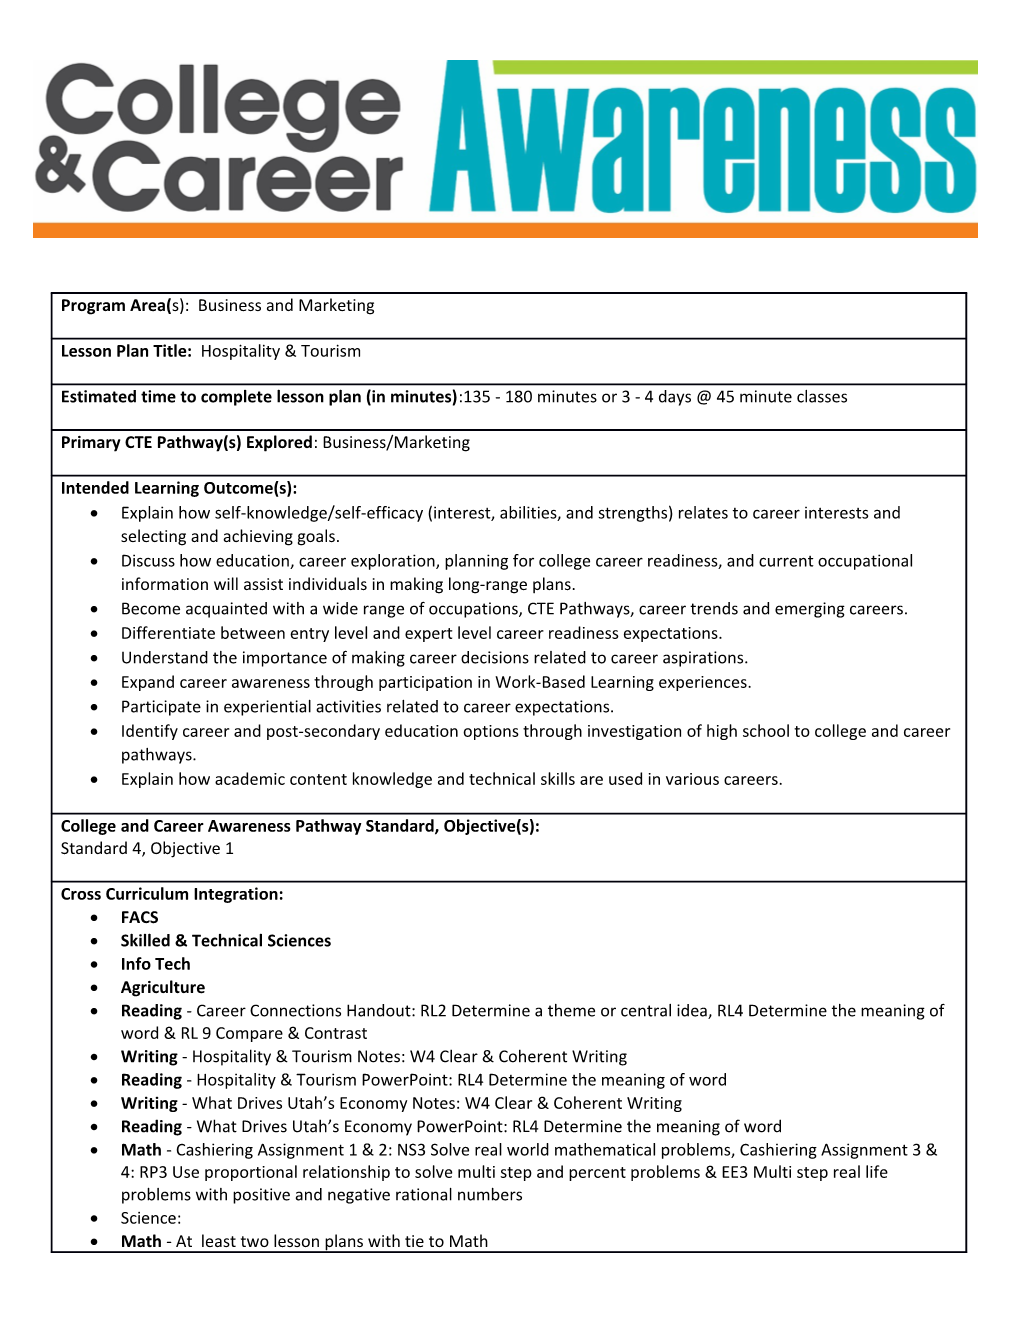 Differentiate Between Entry Level and Expert Level Career Readiness Expectations